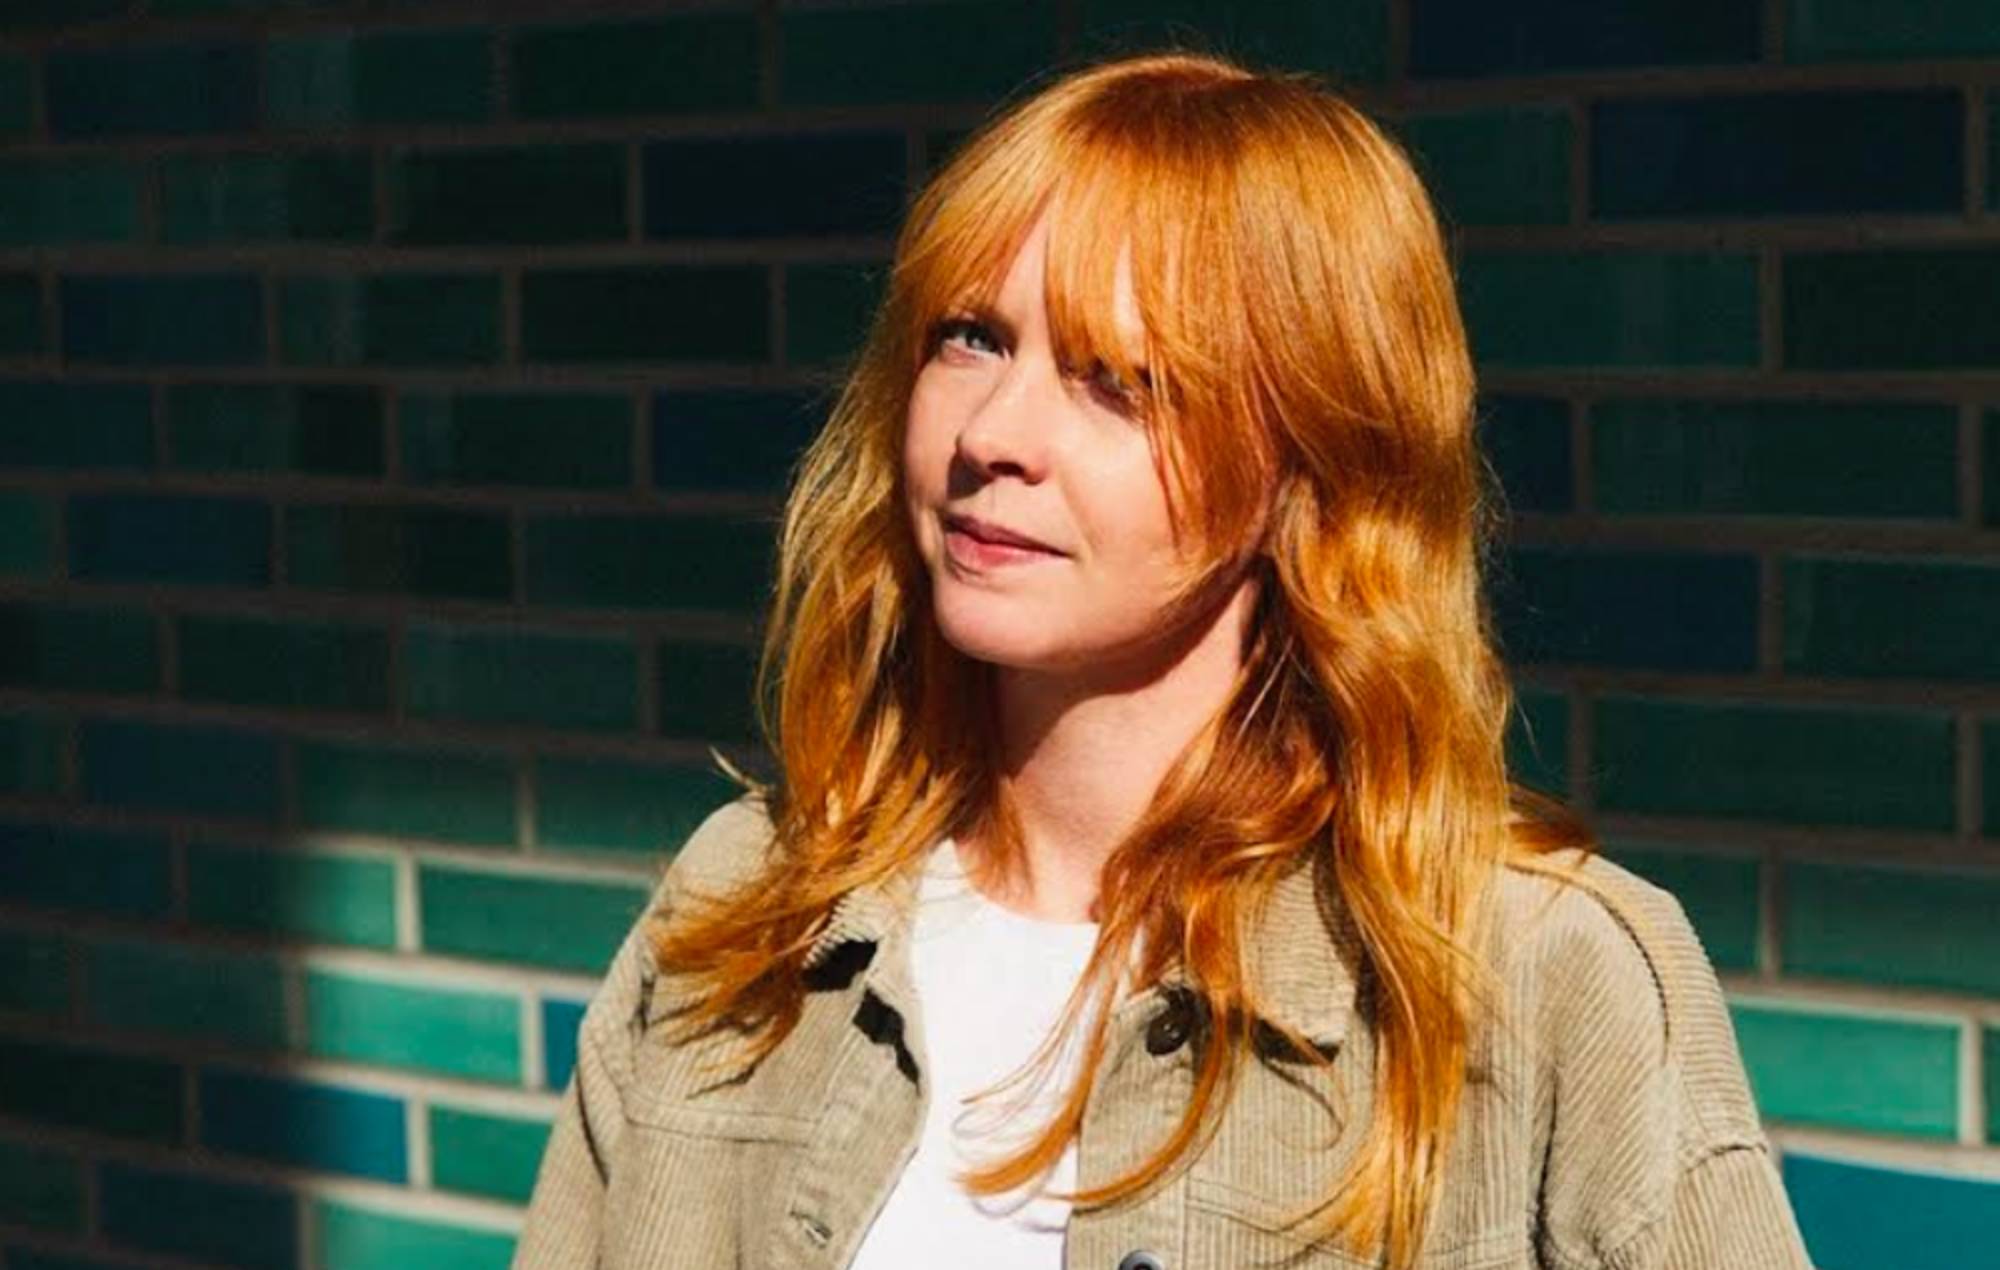 Lucy Rose shares first new single in four years, 'Could You Help Me'